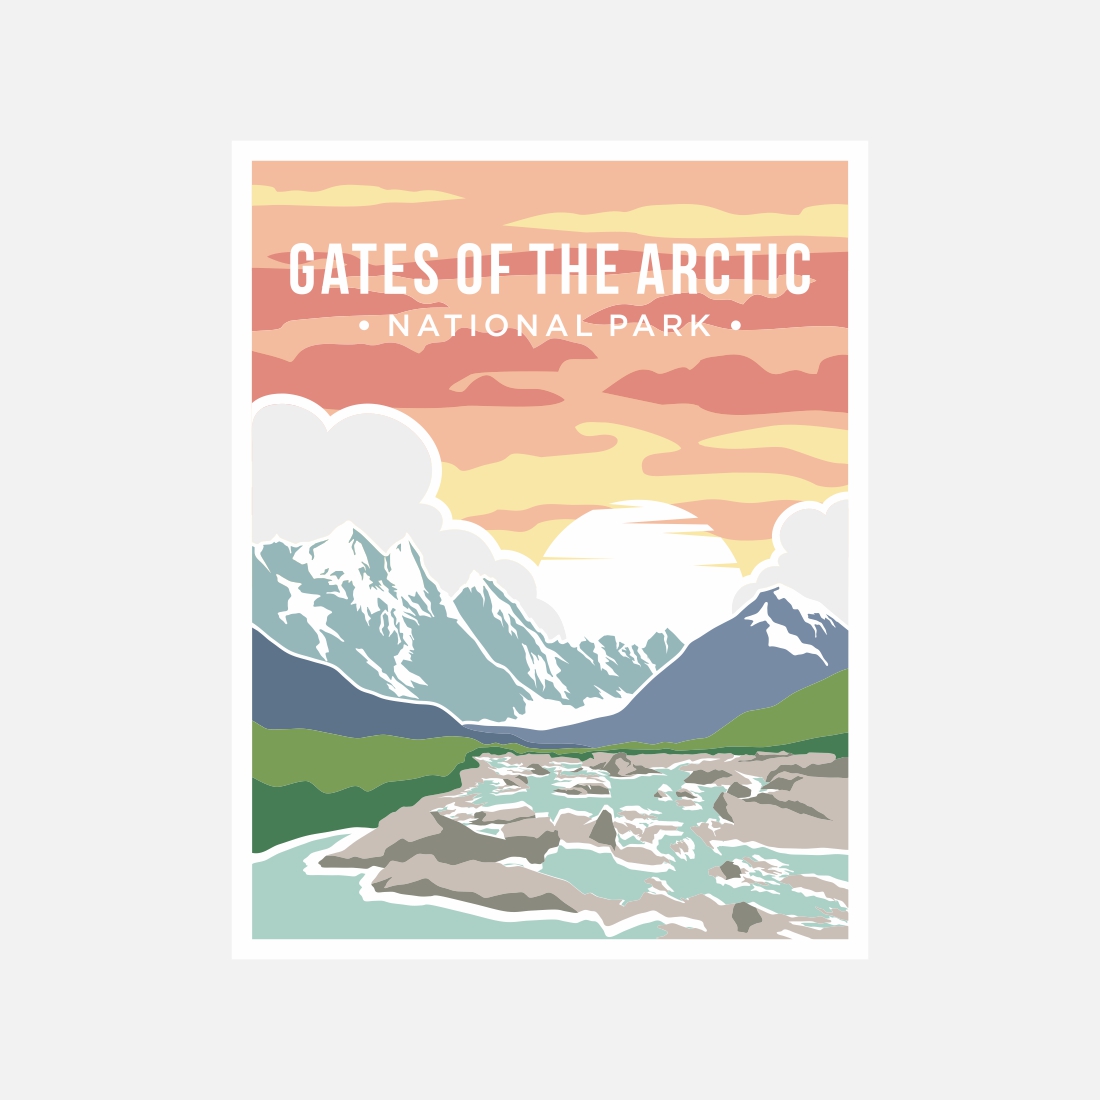 Gate of the arctic National Park poster vector illustration design – Only $8 preview image.